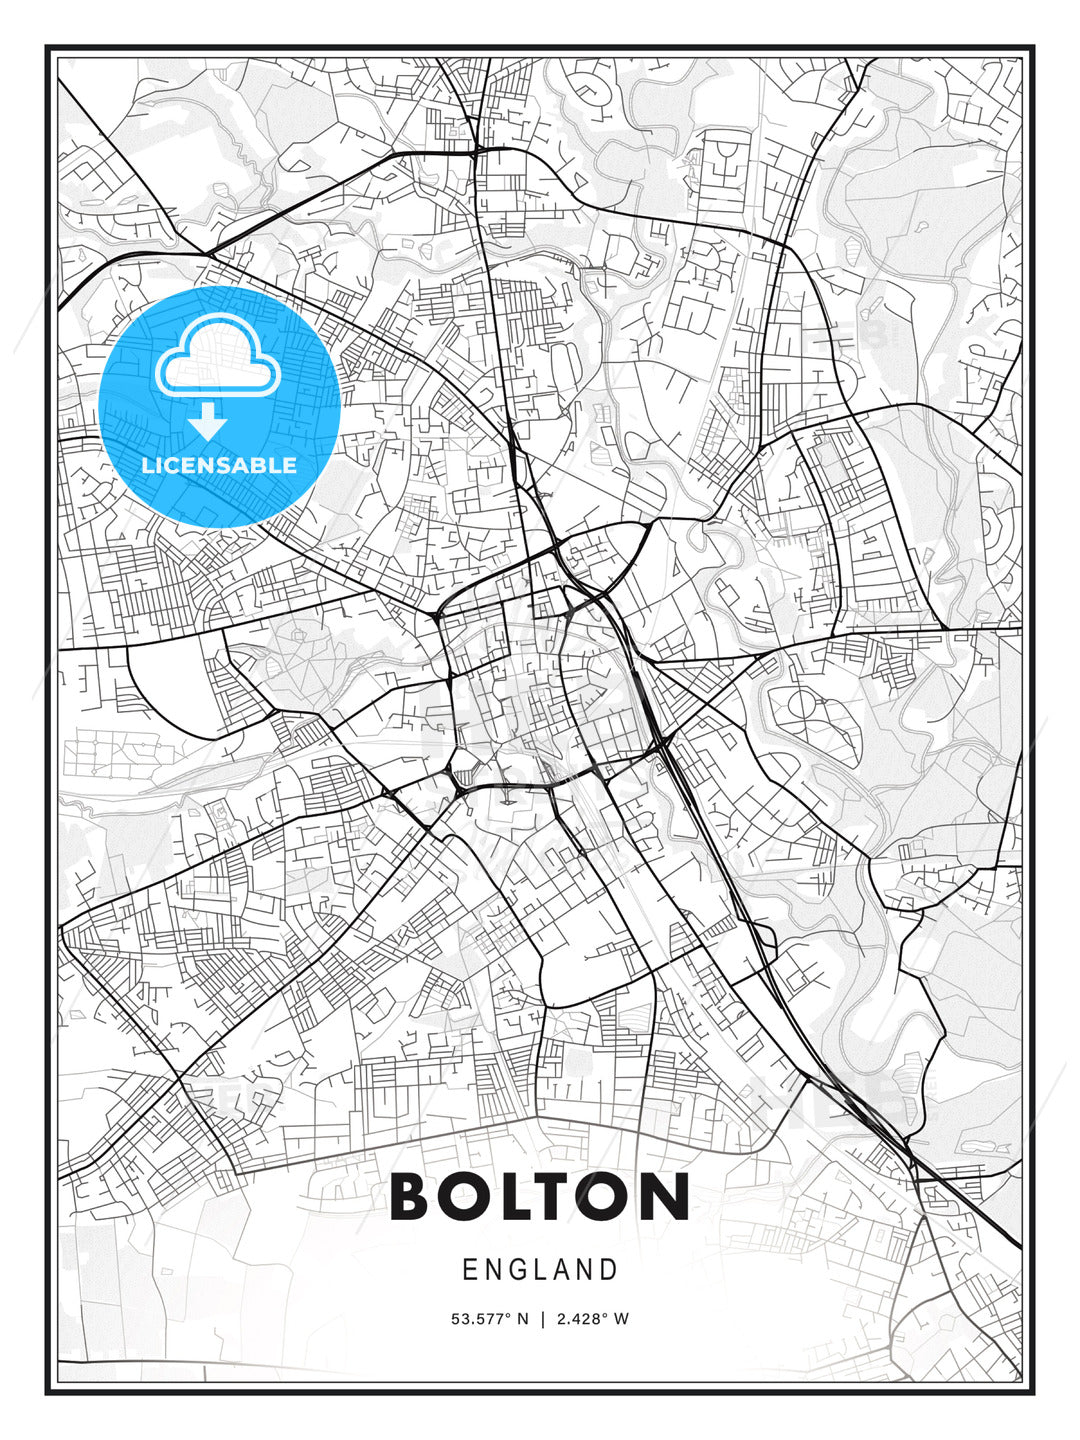 Bolton, England, Modern Print Template in Various Formats - HEBSTREITS Sketches